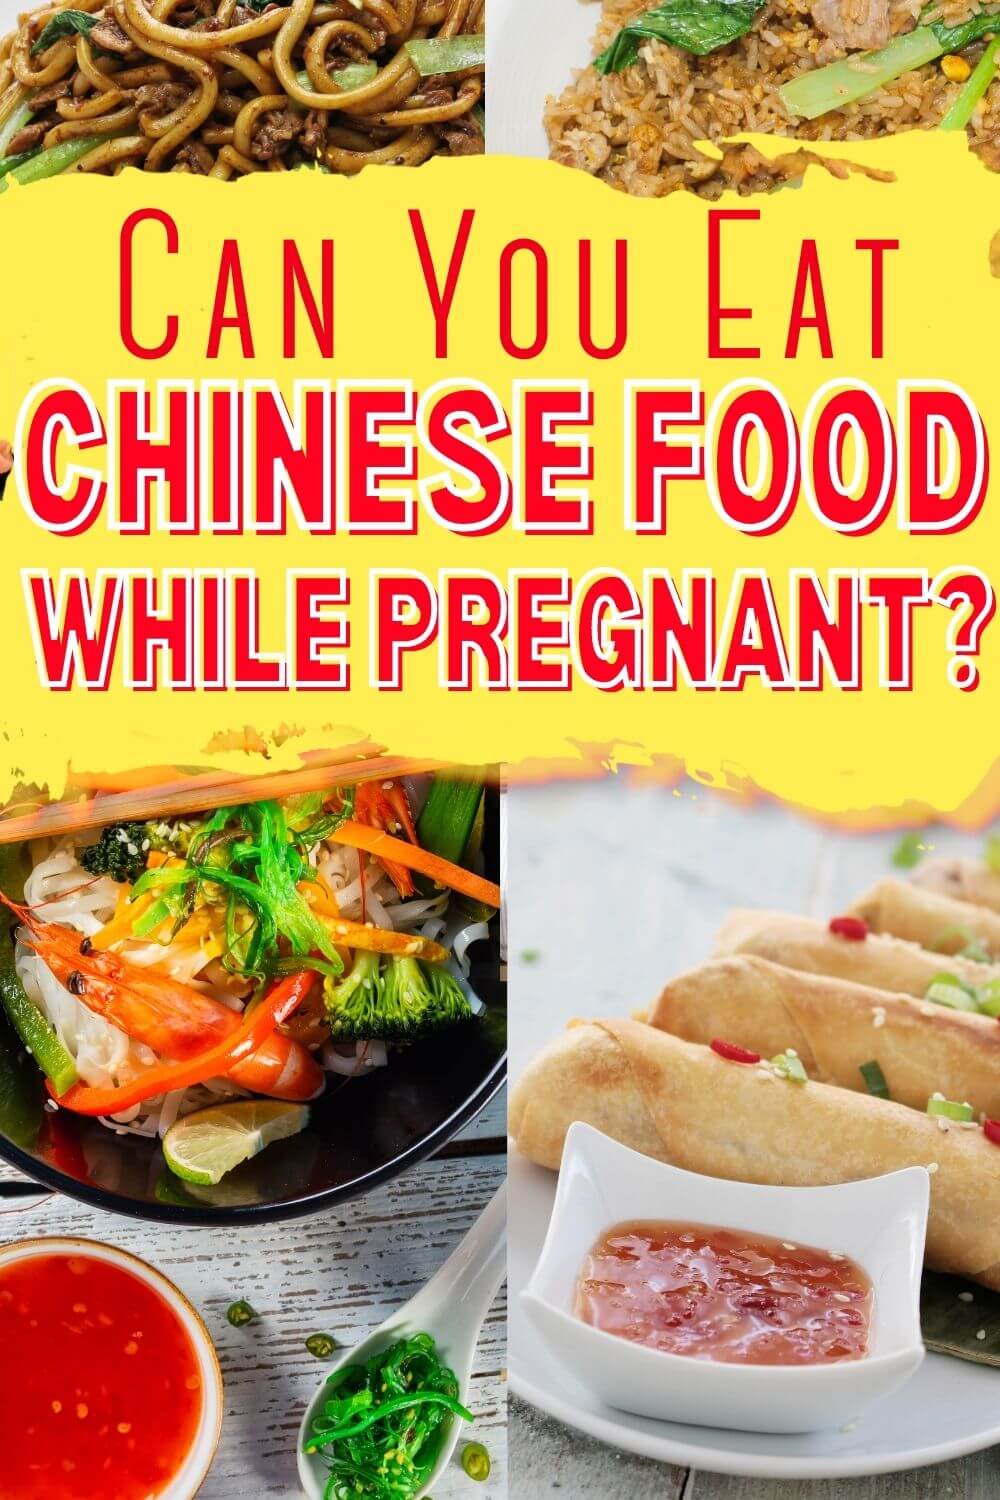 Can you eat Chinese food while pregnant?